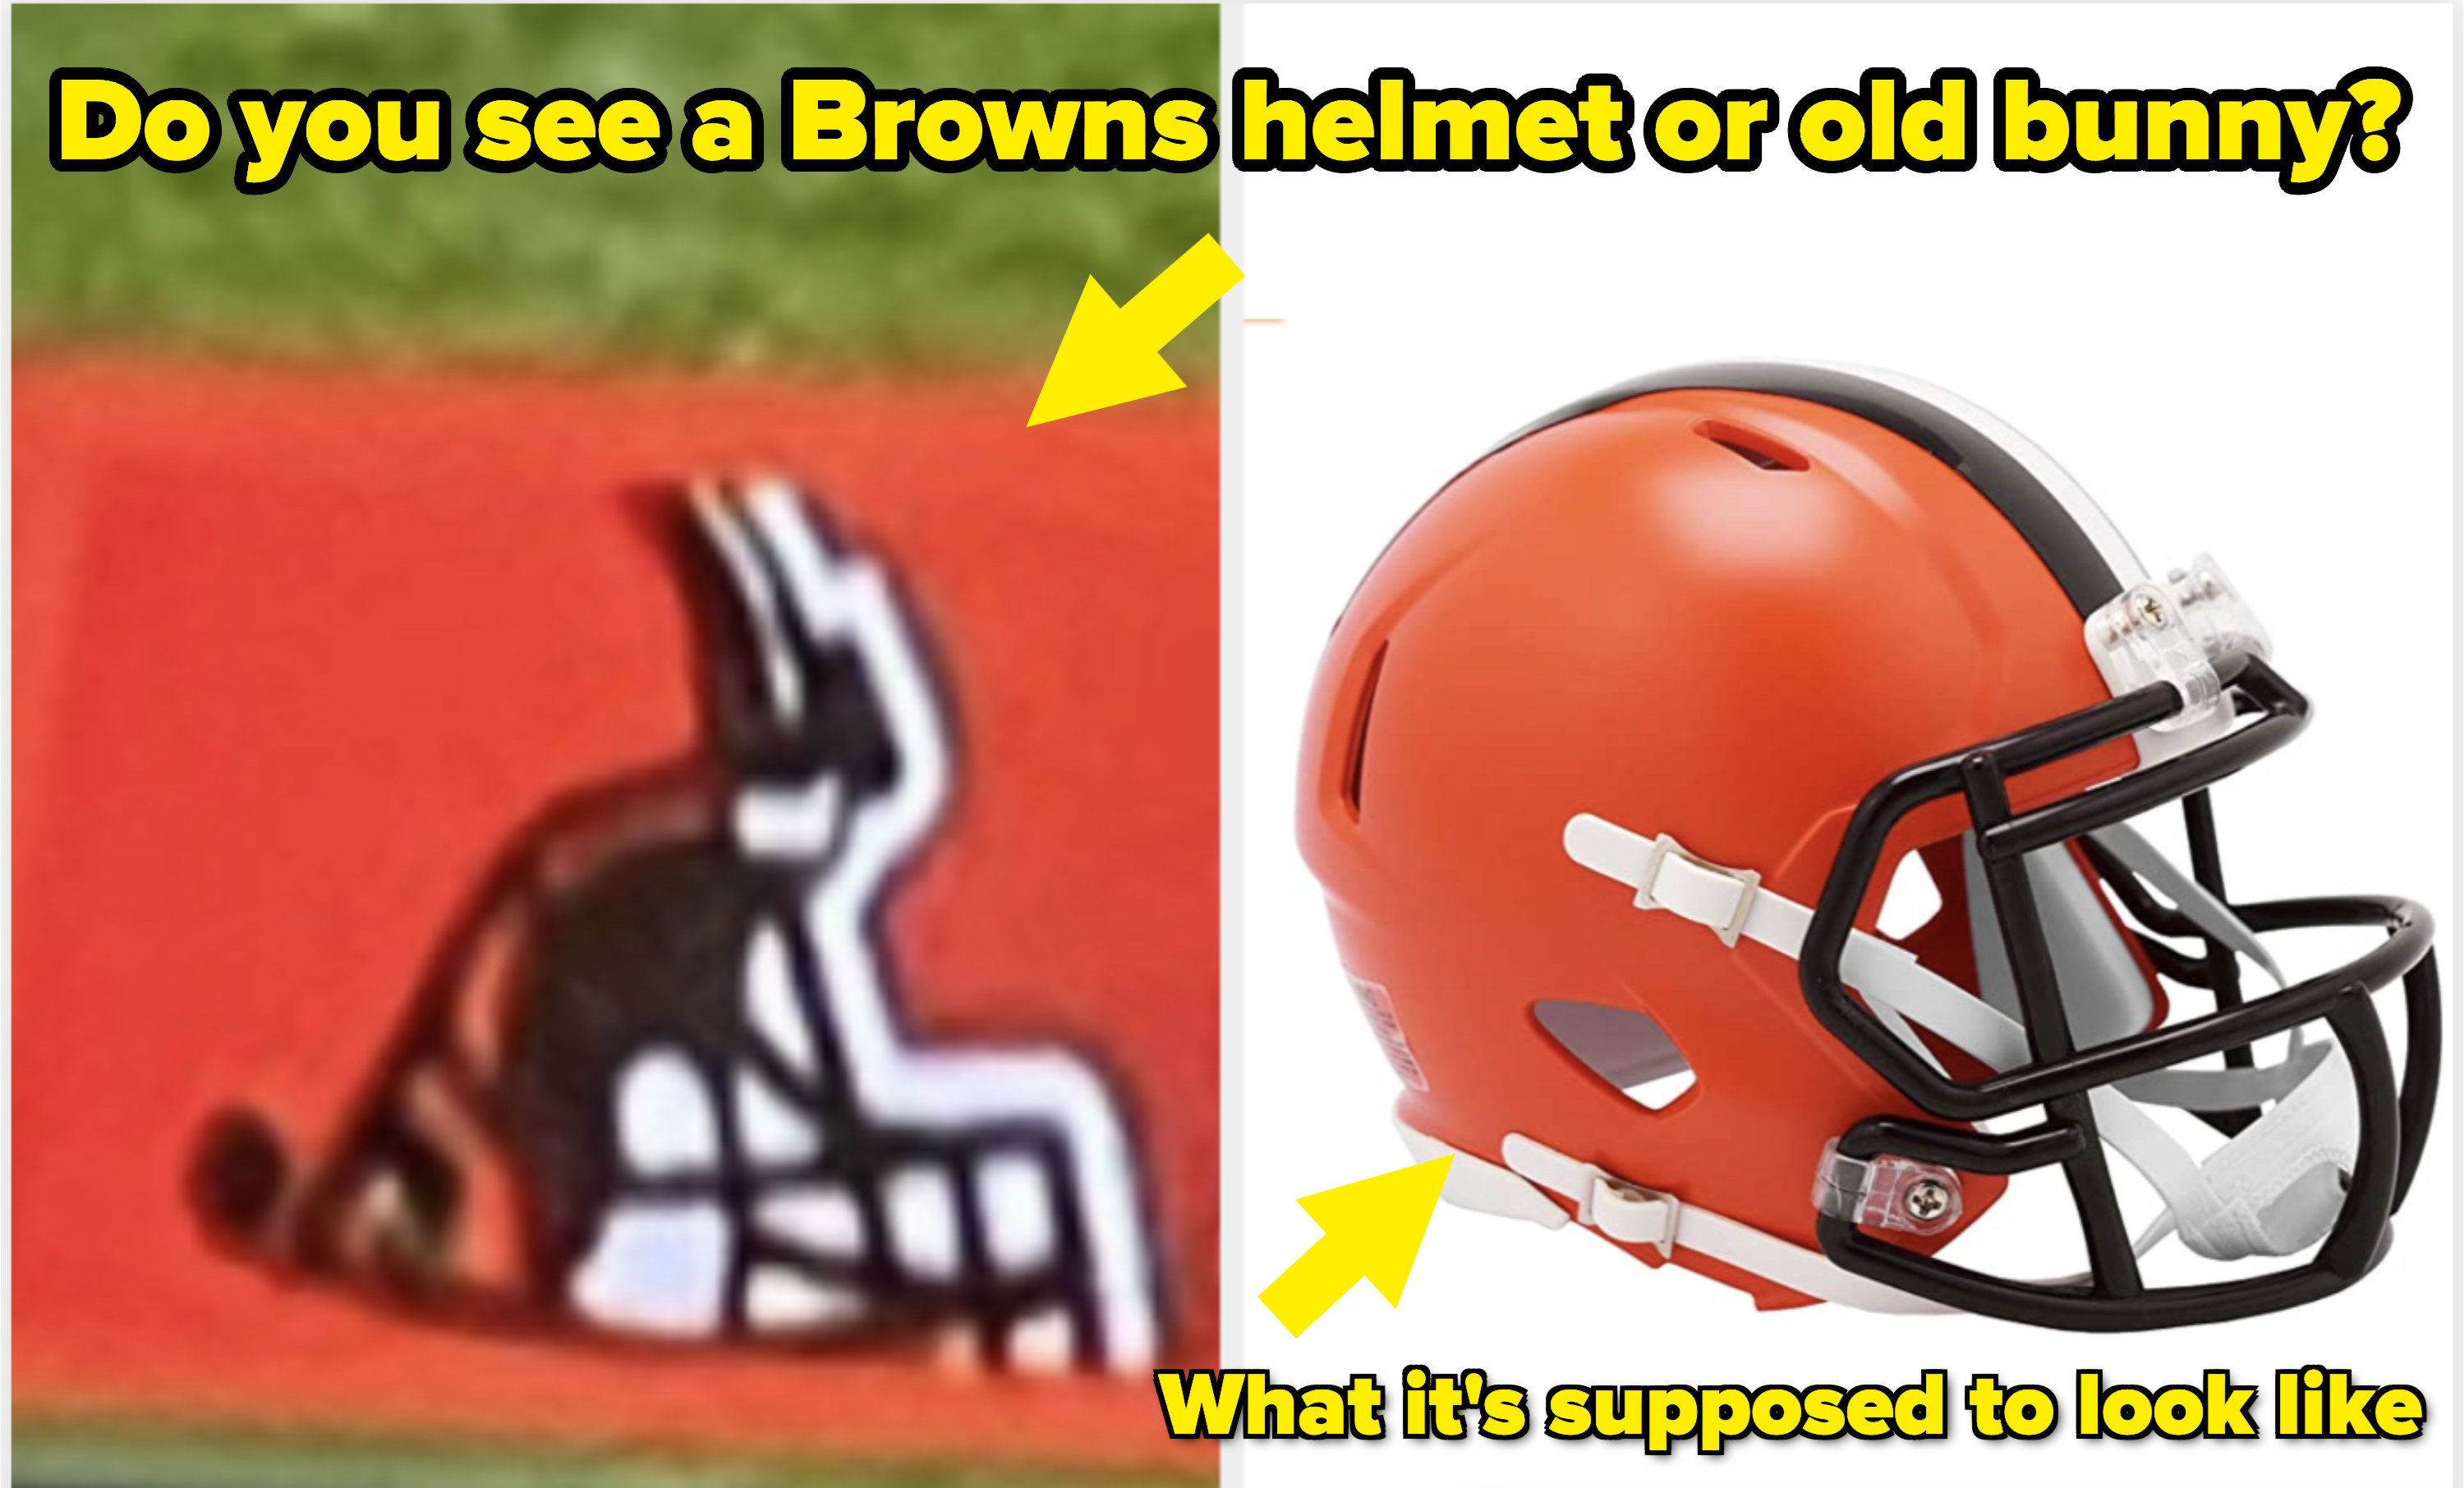 A drawing of the Browns&#x27; helmet makes it look like an old bunny with a walker